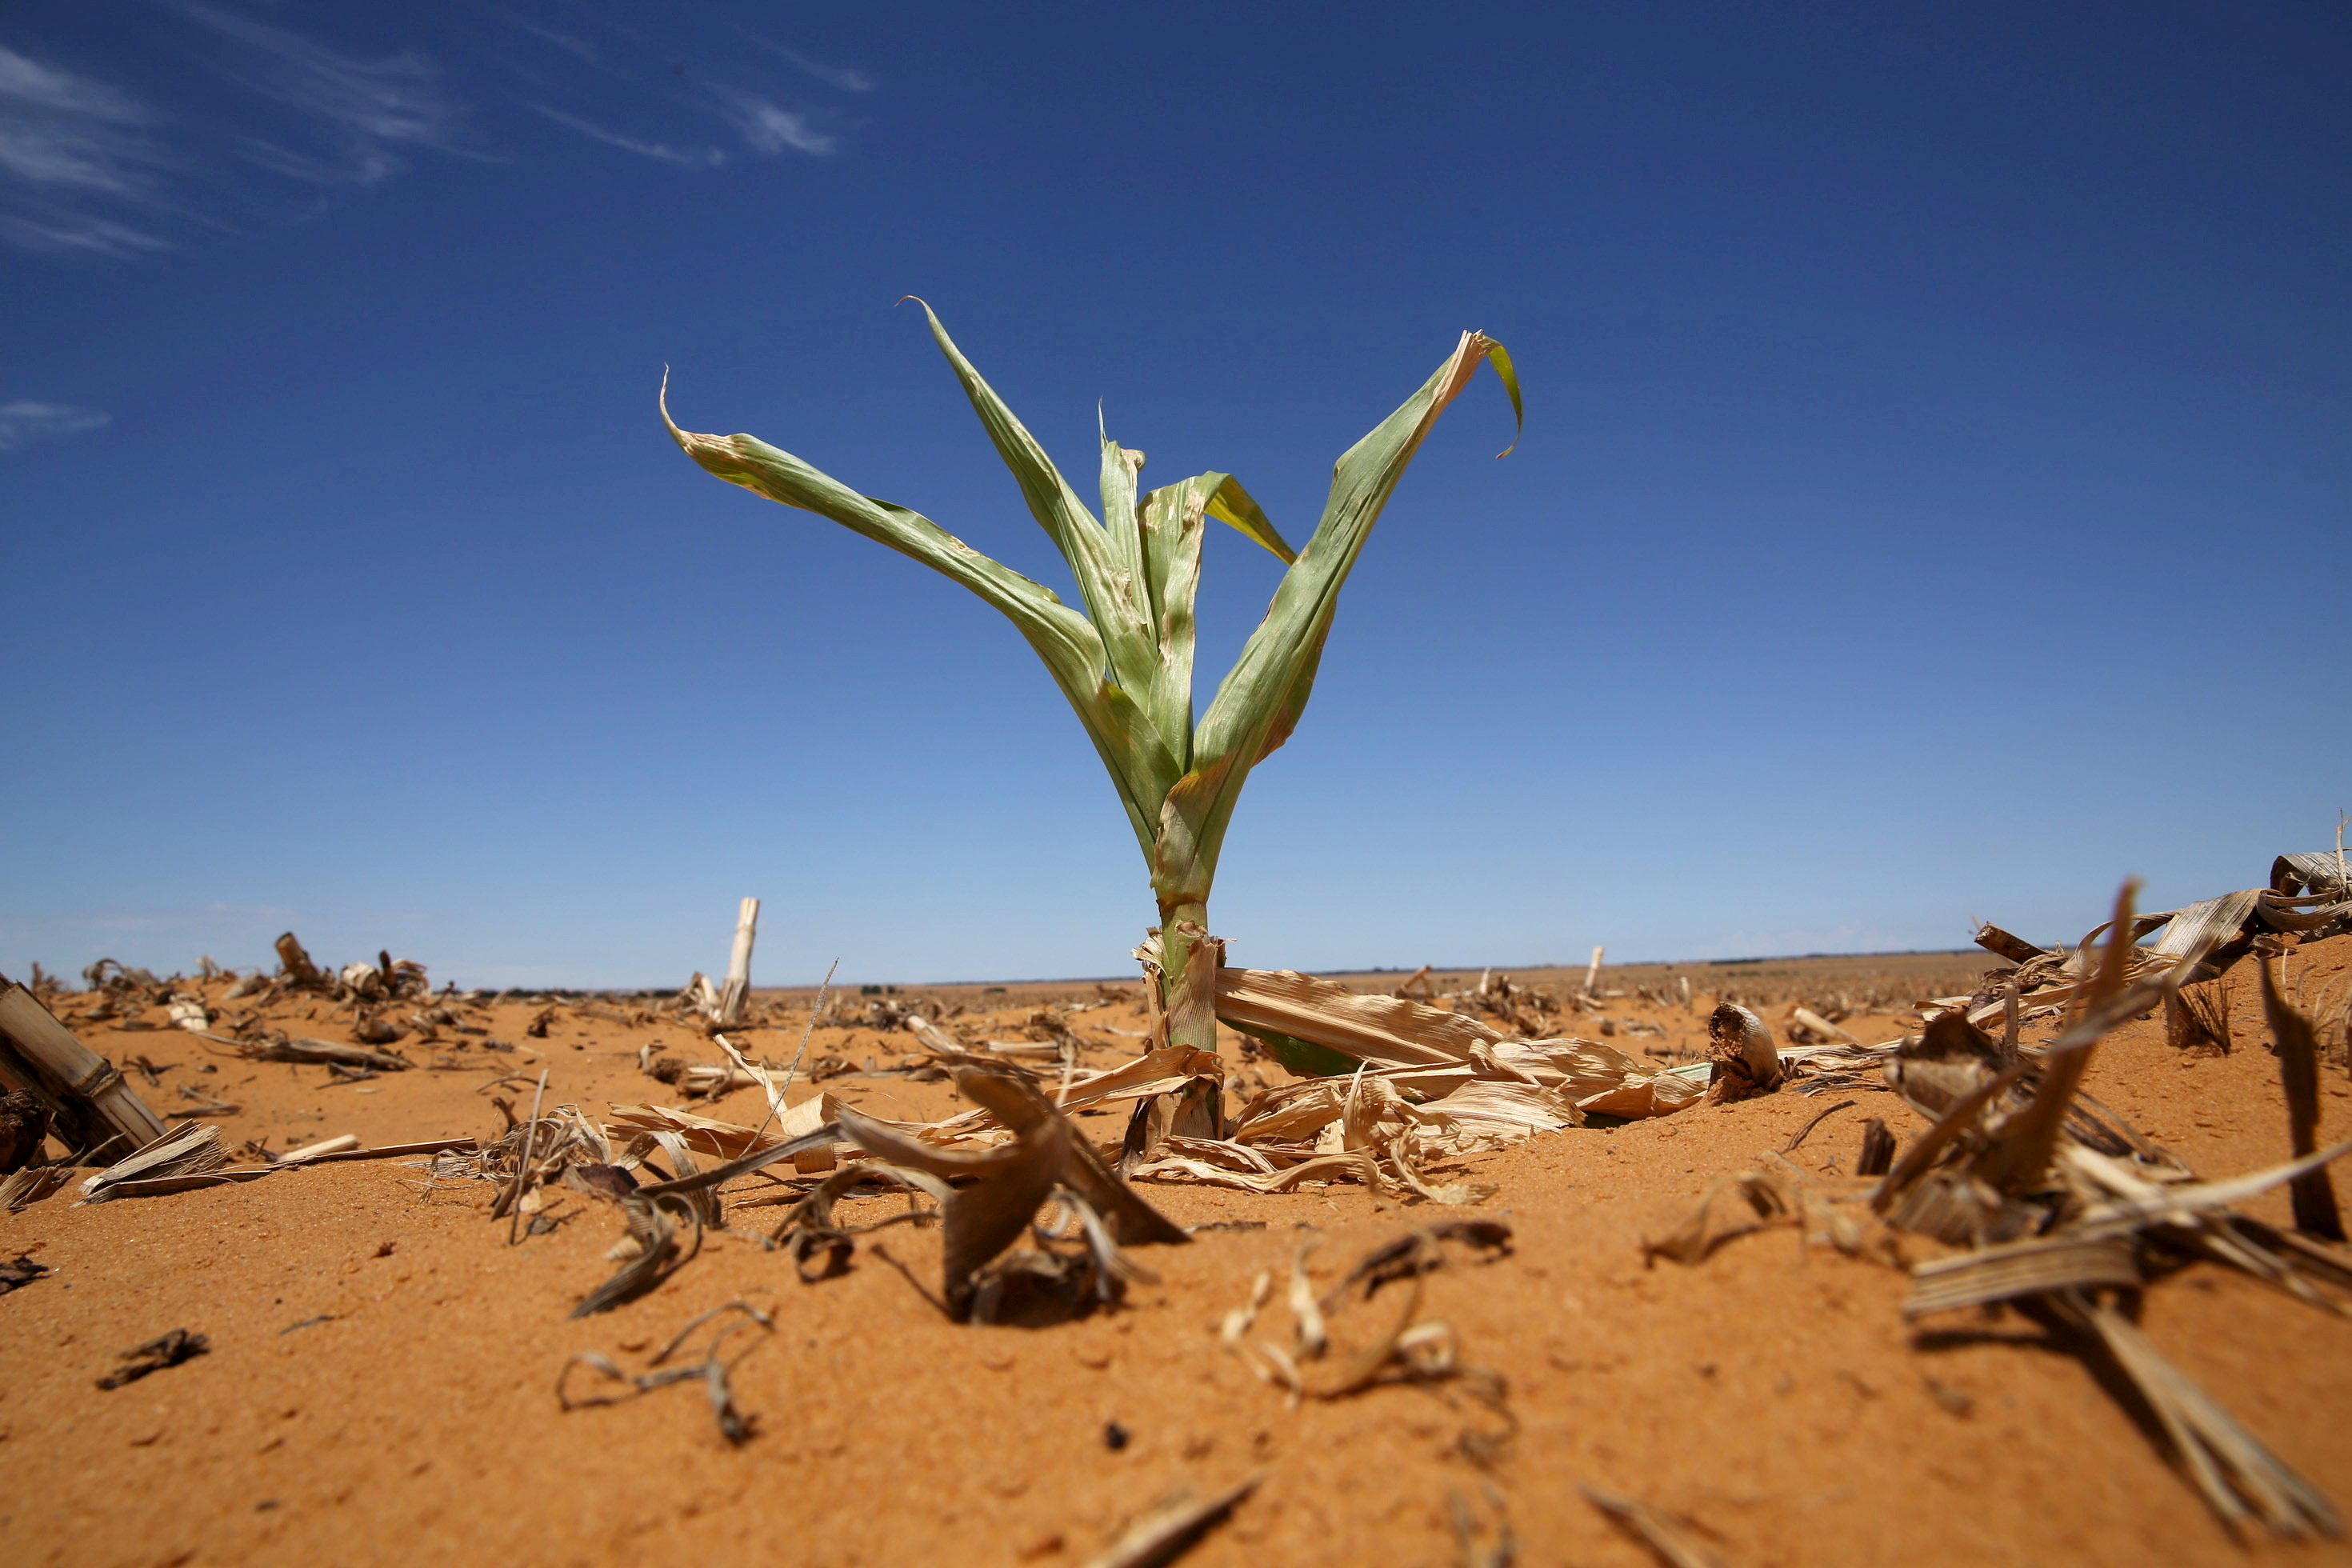 A maize plant is seen among other dried maize at a field in Hoopstad, a maize-producing district in the Free State province